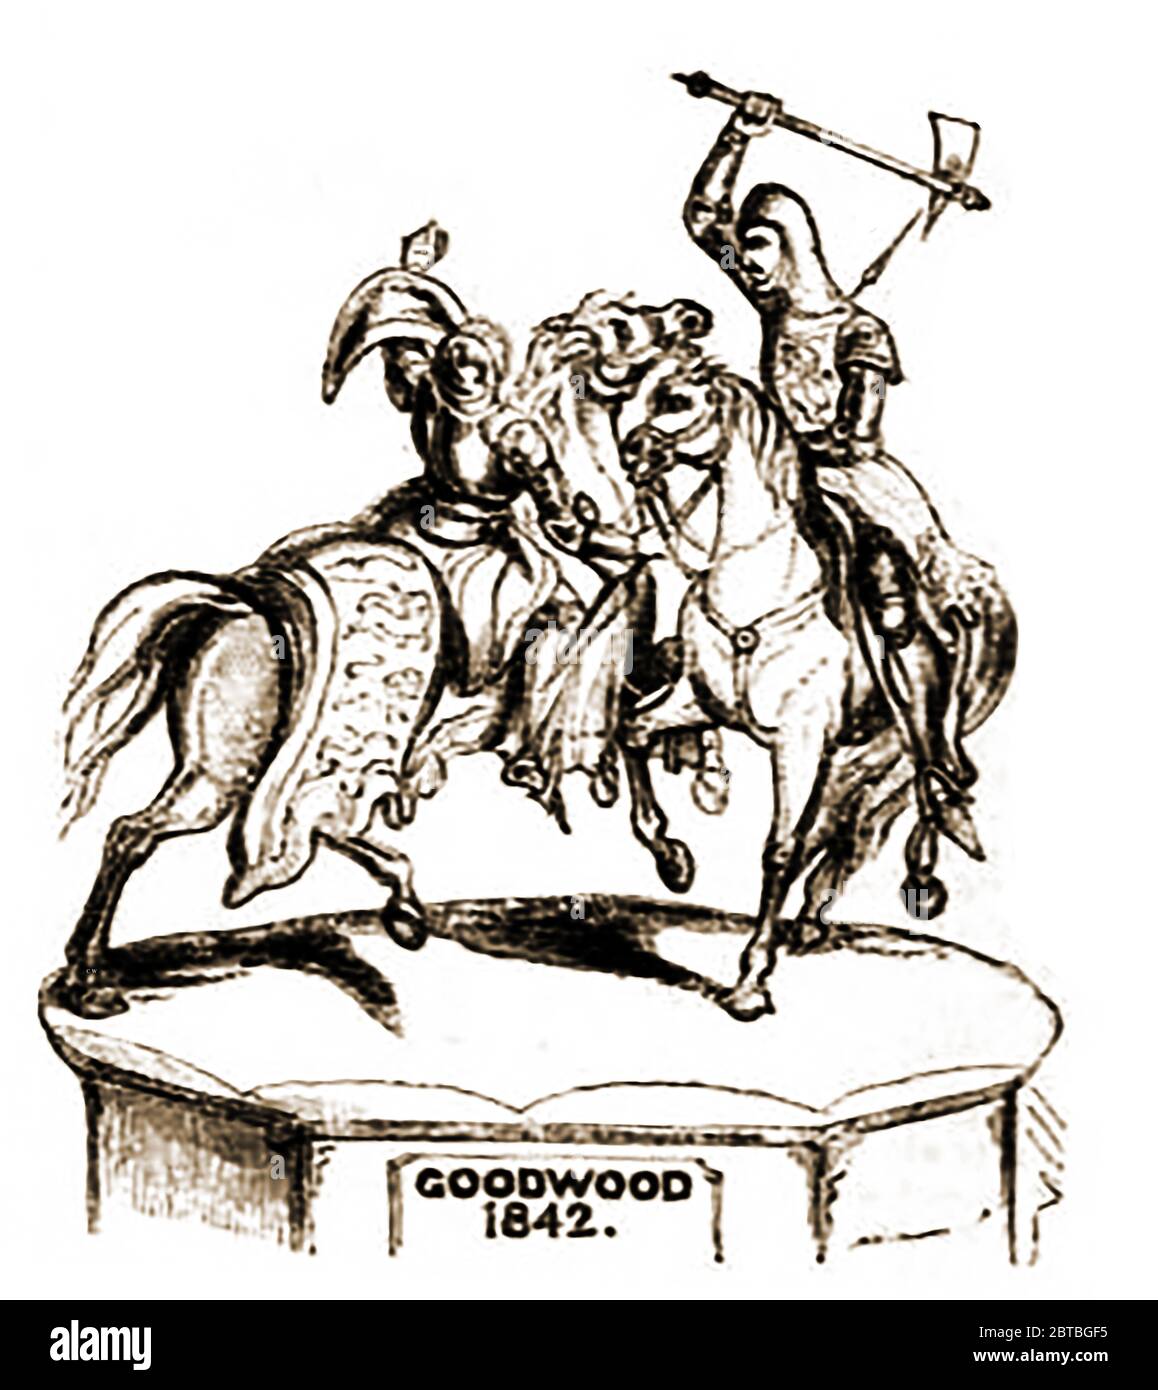 A rare engraving of the 1842 design for  Goodwood Cup featuring Sir Robert Bruce and Henry de Bohun (designed by Mr Cotterill and made in silver by Garrards). At the time the designs were released confirmation was still to be made as to which cup would be awarded for which race and the name it was to be given. (The winner of the Goodwood cup in 1842 was Charles the Twelfth) Stock Photo